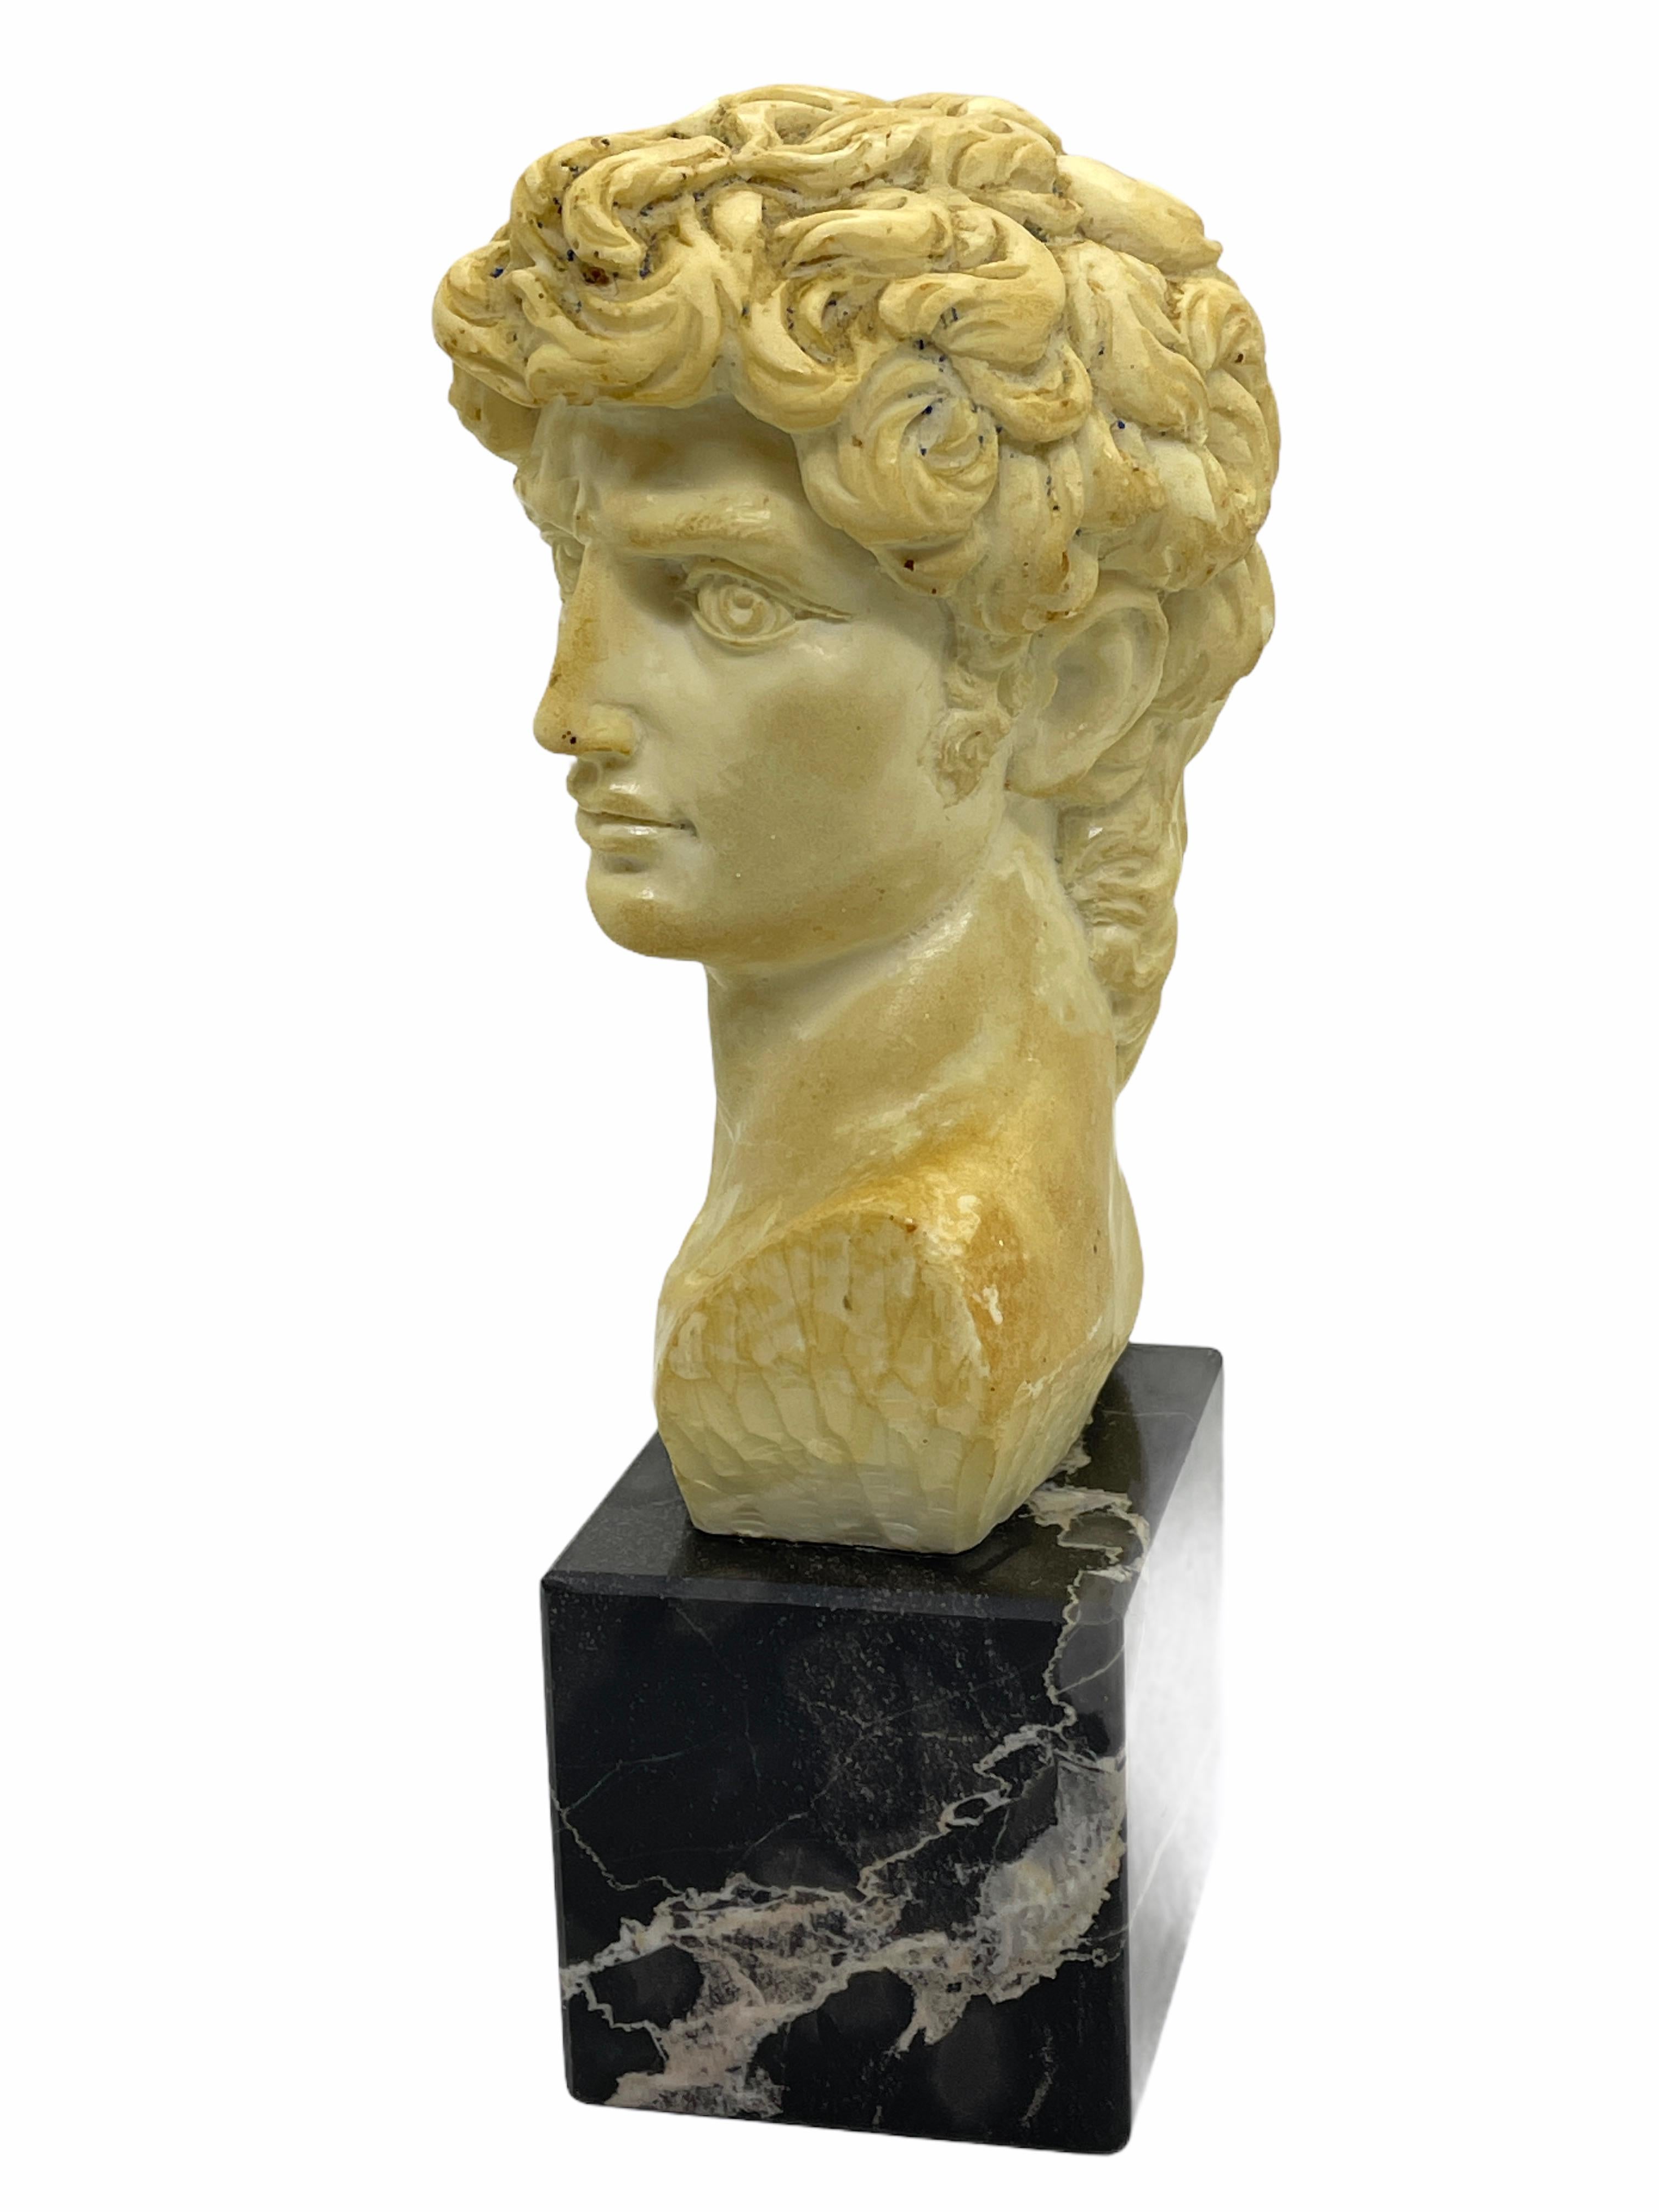 A classic decorative Bust statue. Some wear with a nice patina, but this is old-age. Made of a kind of stone (probably Alabaster) on a marble base. Very decorative and nice to display in your library or any room.